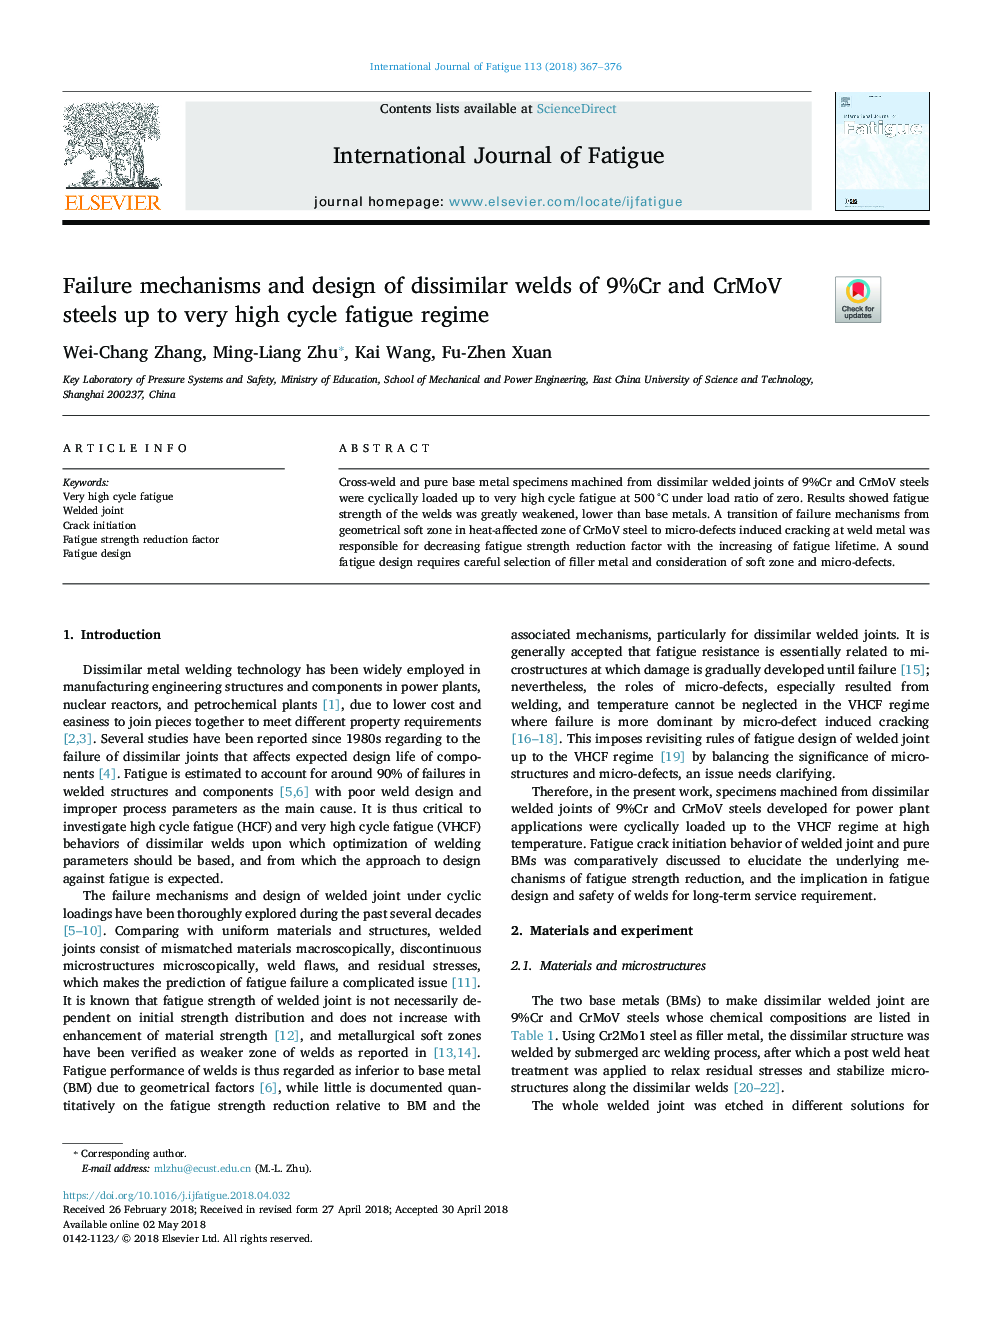 Failure mechanisms and design of dissimilar welds of 9%Cr and CrMoV steels up to very high cycle fatigue regime